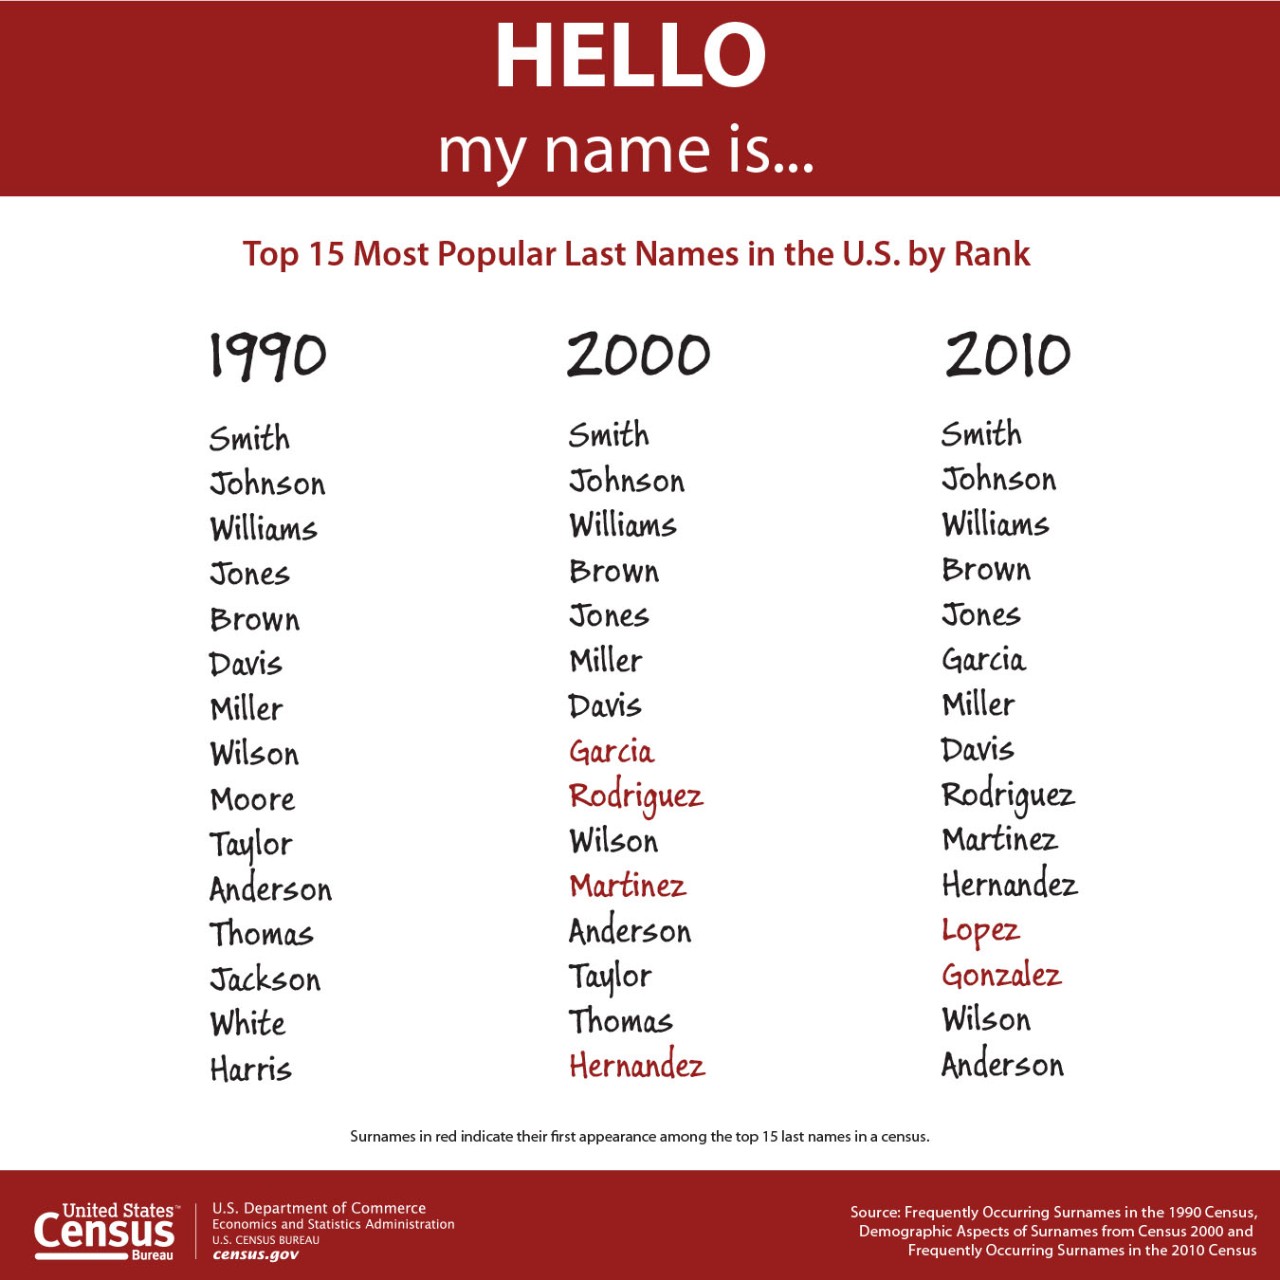 Hello my name is.... (Top 15 Most Popular Last Names in the U.S. by Rank)